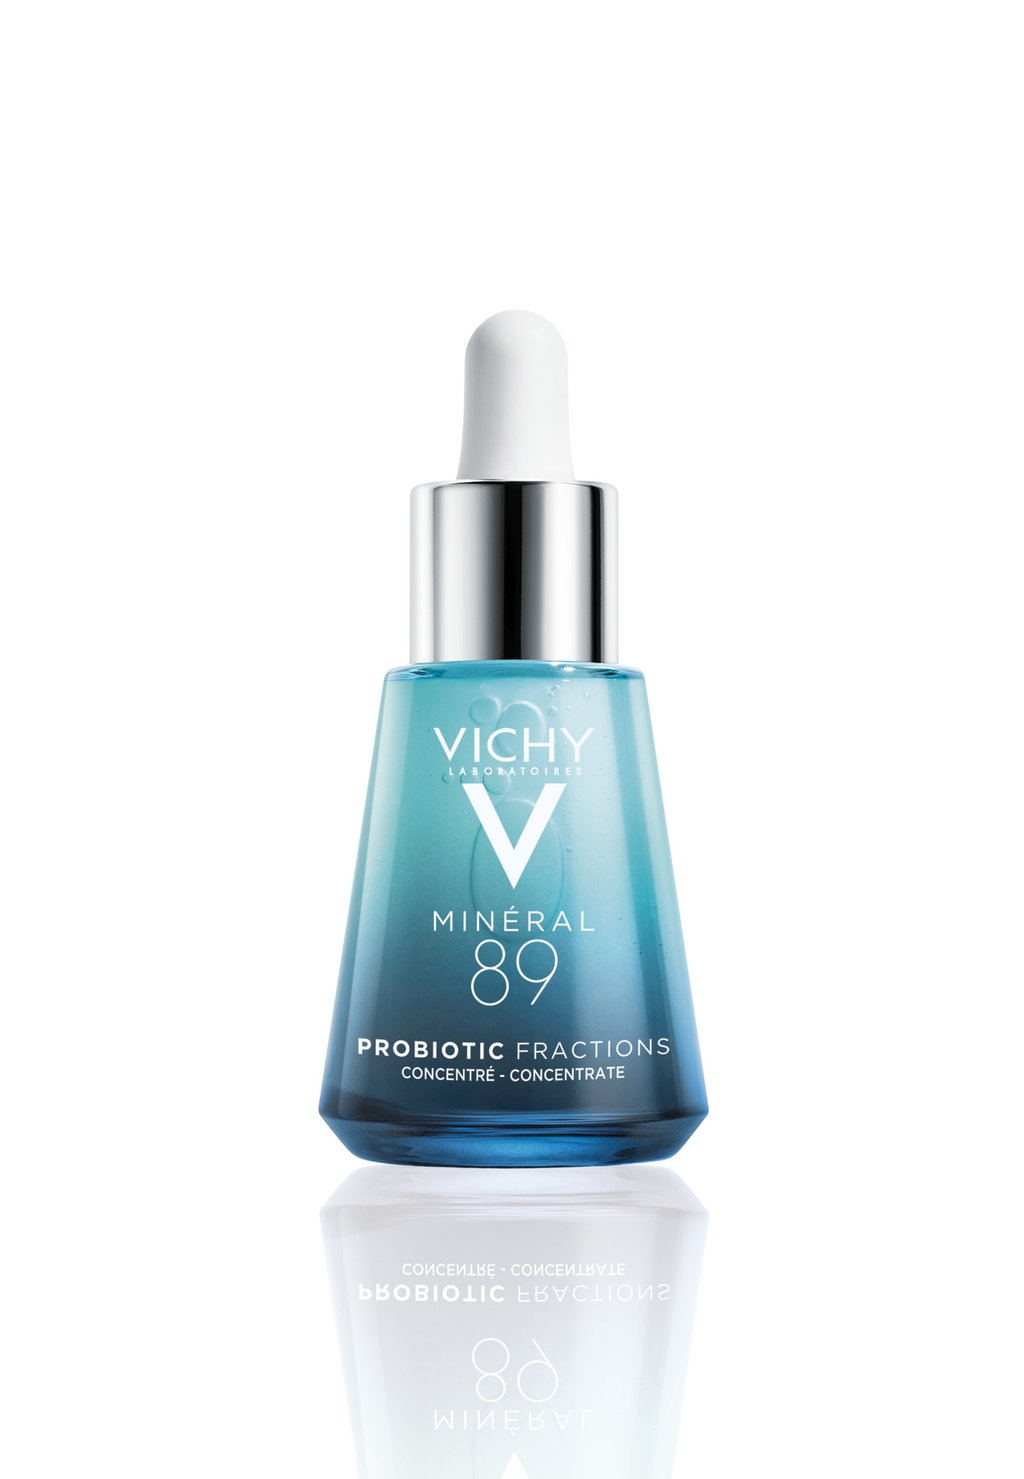 цена Сыворотка FACE CARE CARING MINÉRAL 89 PROBIOTIC FRACTIONS VICHY